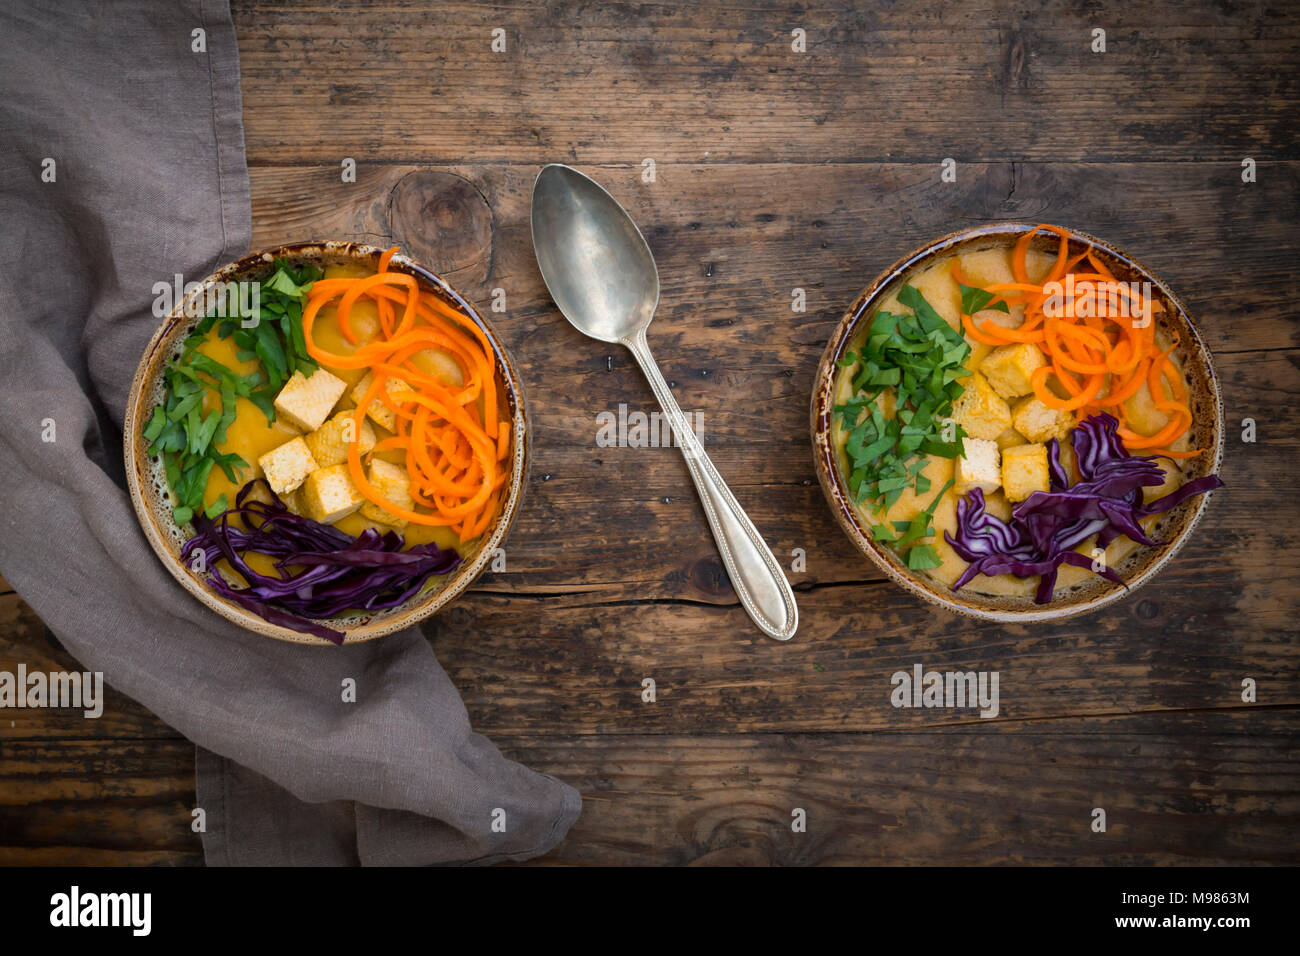 Turmeric curry dish with carrot, tofu, red cabbage and parsley in bowl Stock Photo